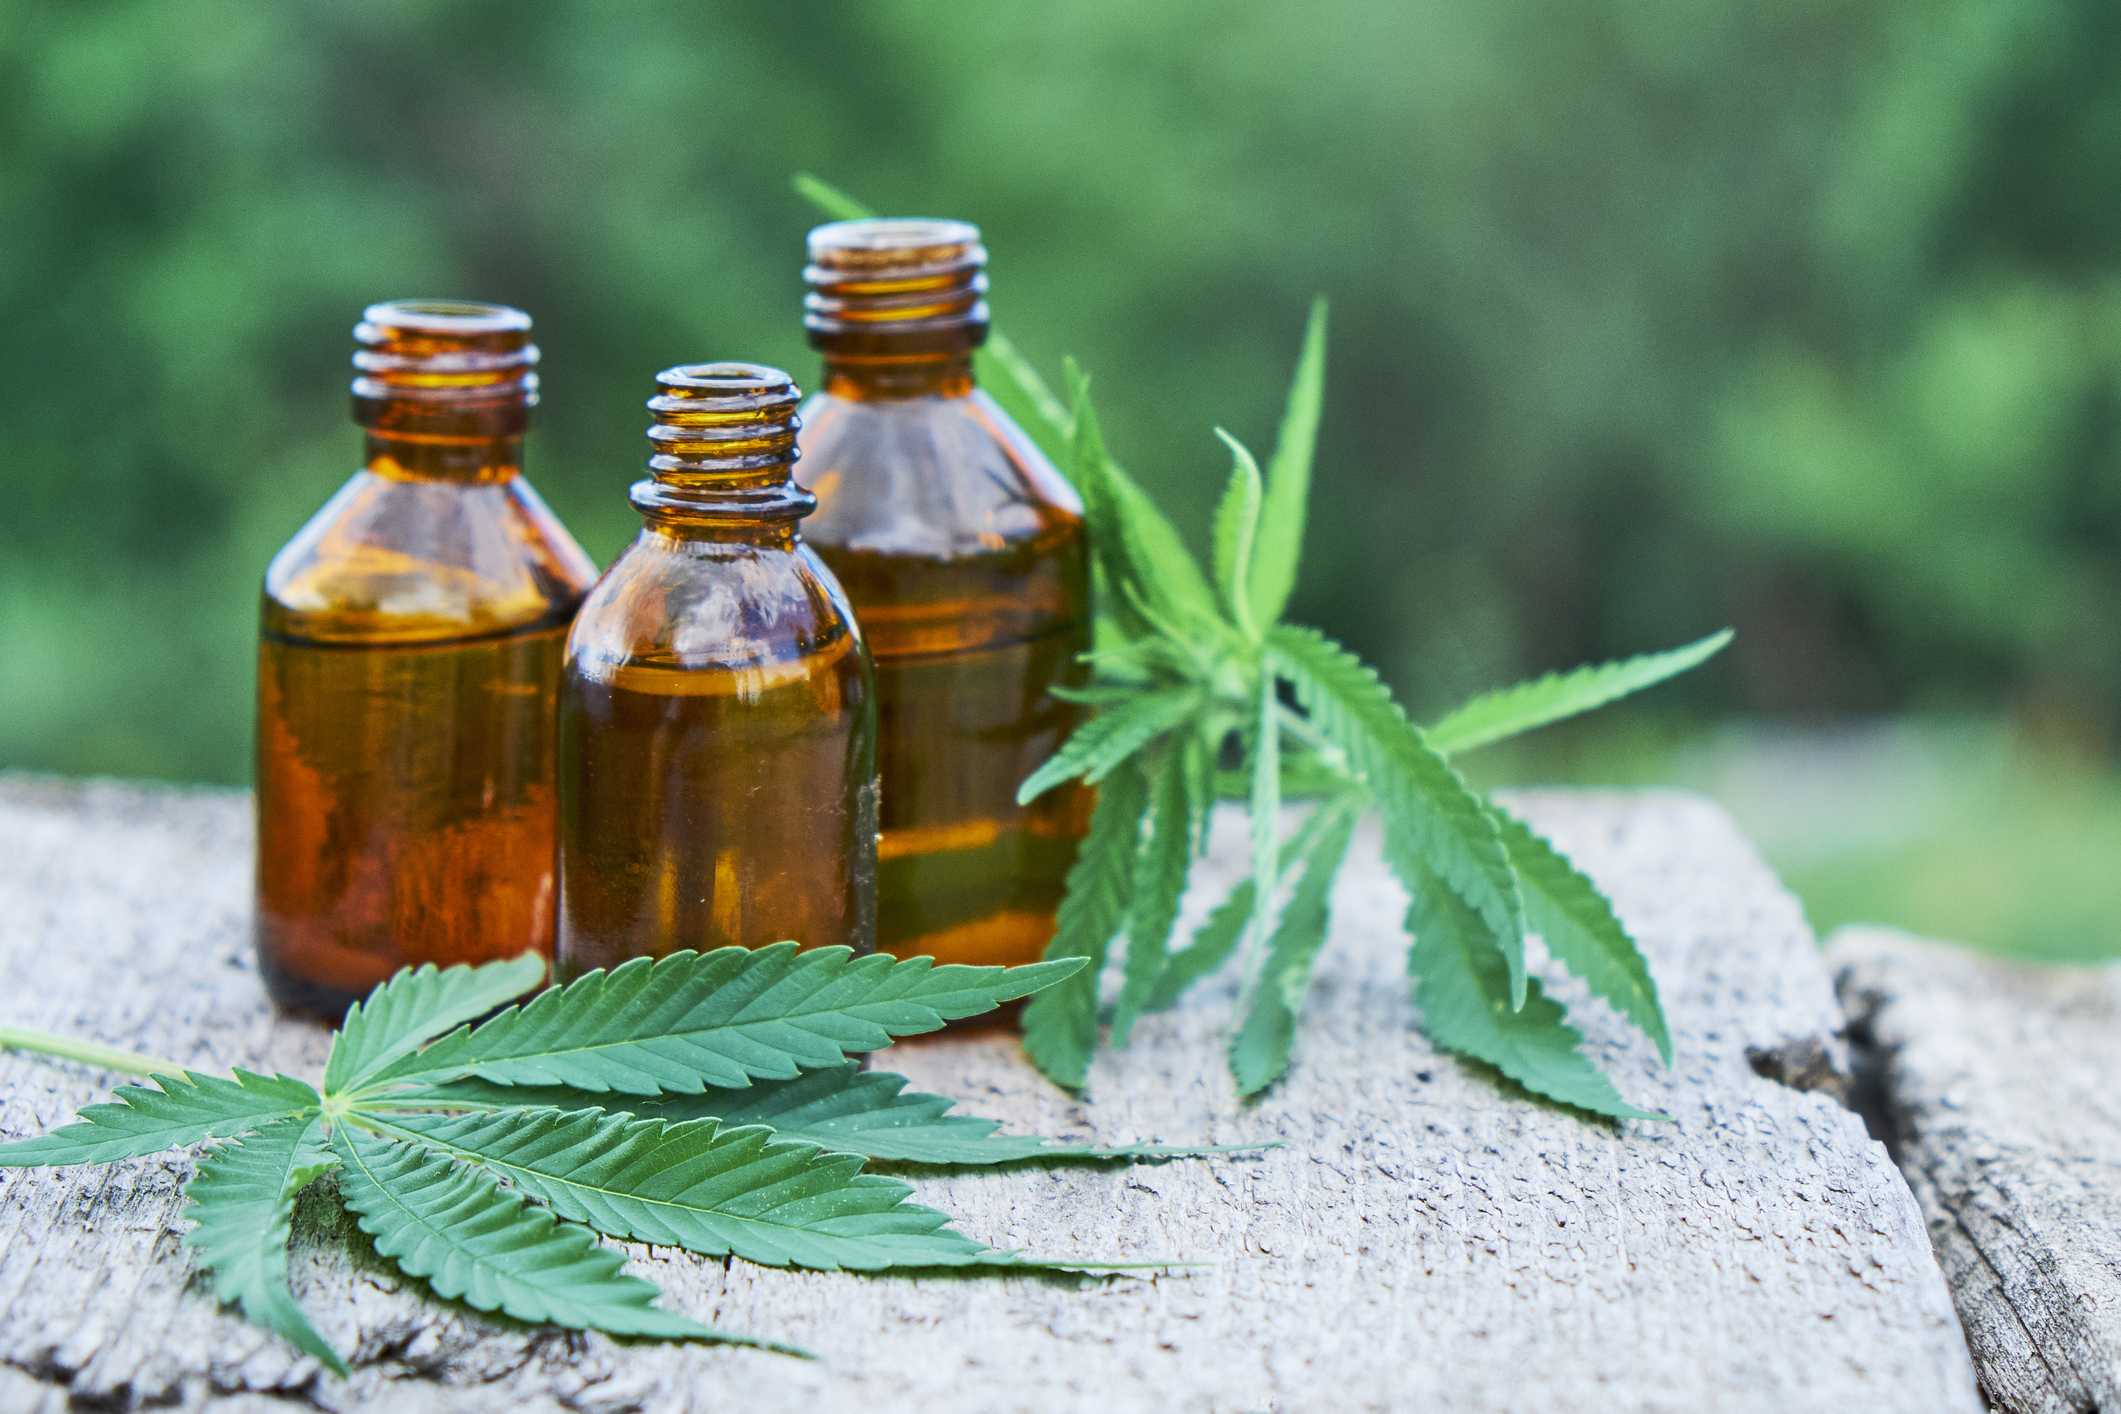 How Does Cbd Oil Treat Seizures - Cbd|Oil|Cannabidiol|Products|View|Abstract|Effects|Hemp|Cannabis|Product|Thc|Pain|People|Health|Body|Plant|Cannabinoids|Medications|Oils|Drug|Benefits|System|Study|Marijuana|Anxiety|Side|Research|Effect|Liver|Quality|Treatment|Studies|Epilepsy|Symptoms|Gummies|Compounds|Dose|Time|Inflammation|Bottle|Cbd Oil|View Abstract|Side Effects|Cbd Products|Endocannabinoid System|Multiple Sclerosis|Cbd Oils|Cbd Gummies|Cannabis Plant|Hemp Oil|Cbd Product|Hemp Plant|United States|Cytochrome P450|Many People|Chronic Pain|Nuleaf Naturals|Royal Cbd|Full-Spectrum Cbd Oil|Drug Administration|Cbd Oil Products|Medical Marijuana|Drug Test|Heavy Metals|Clinical Trial|Clinical Trials|Cbd Oil Side|Rating Highlights|Wide Variety|Animal Studies